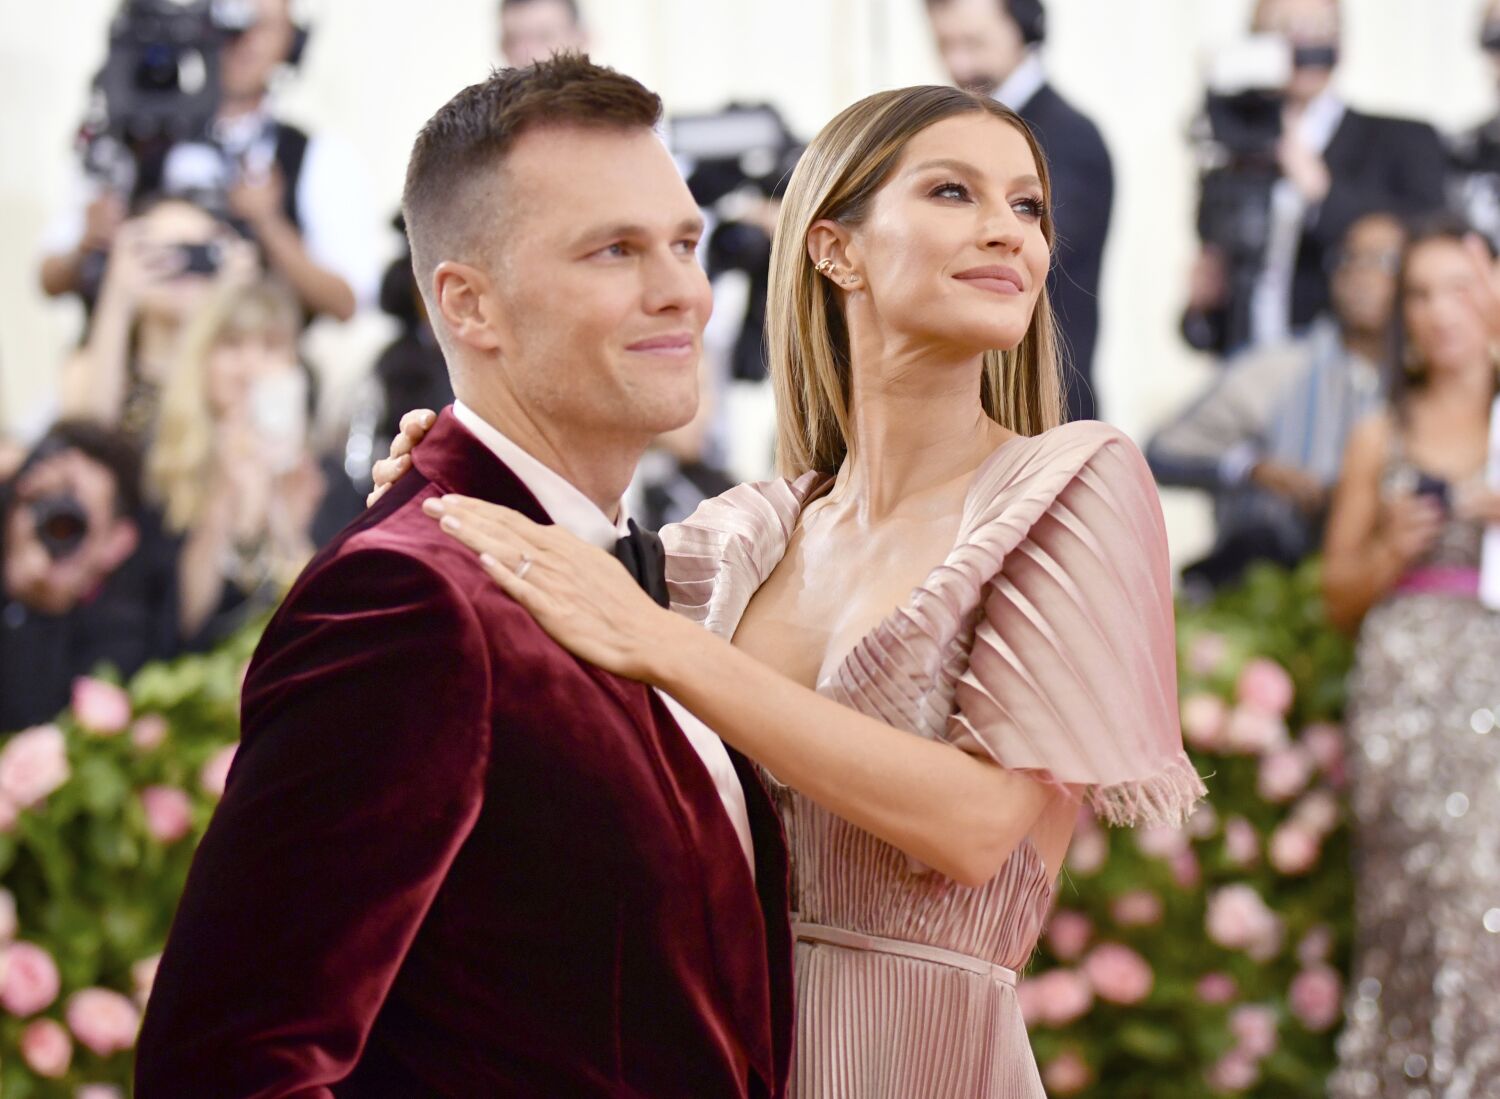 It's officially over: Tom Brady and Gisele Bündchen confirm they've finalized divorce